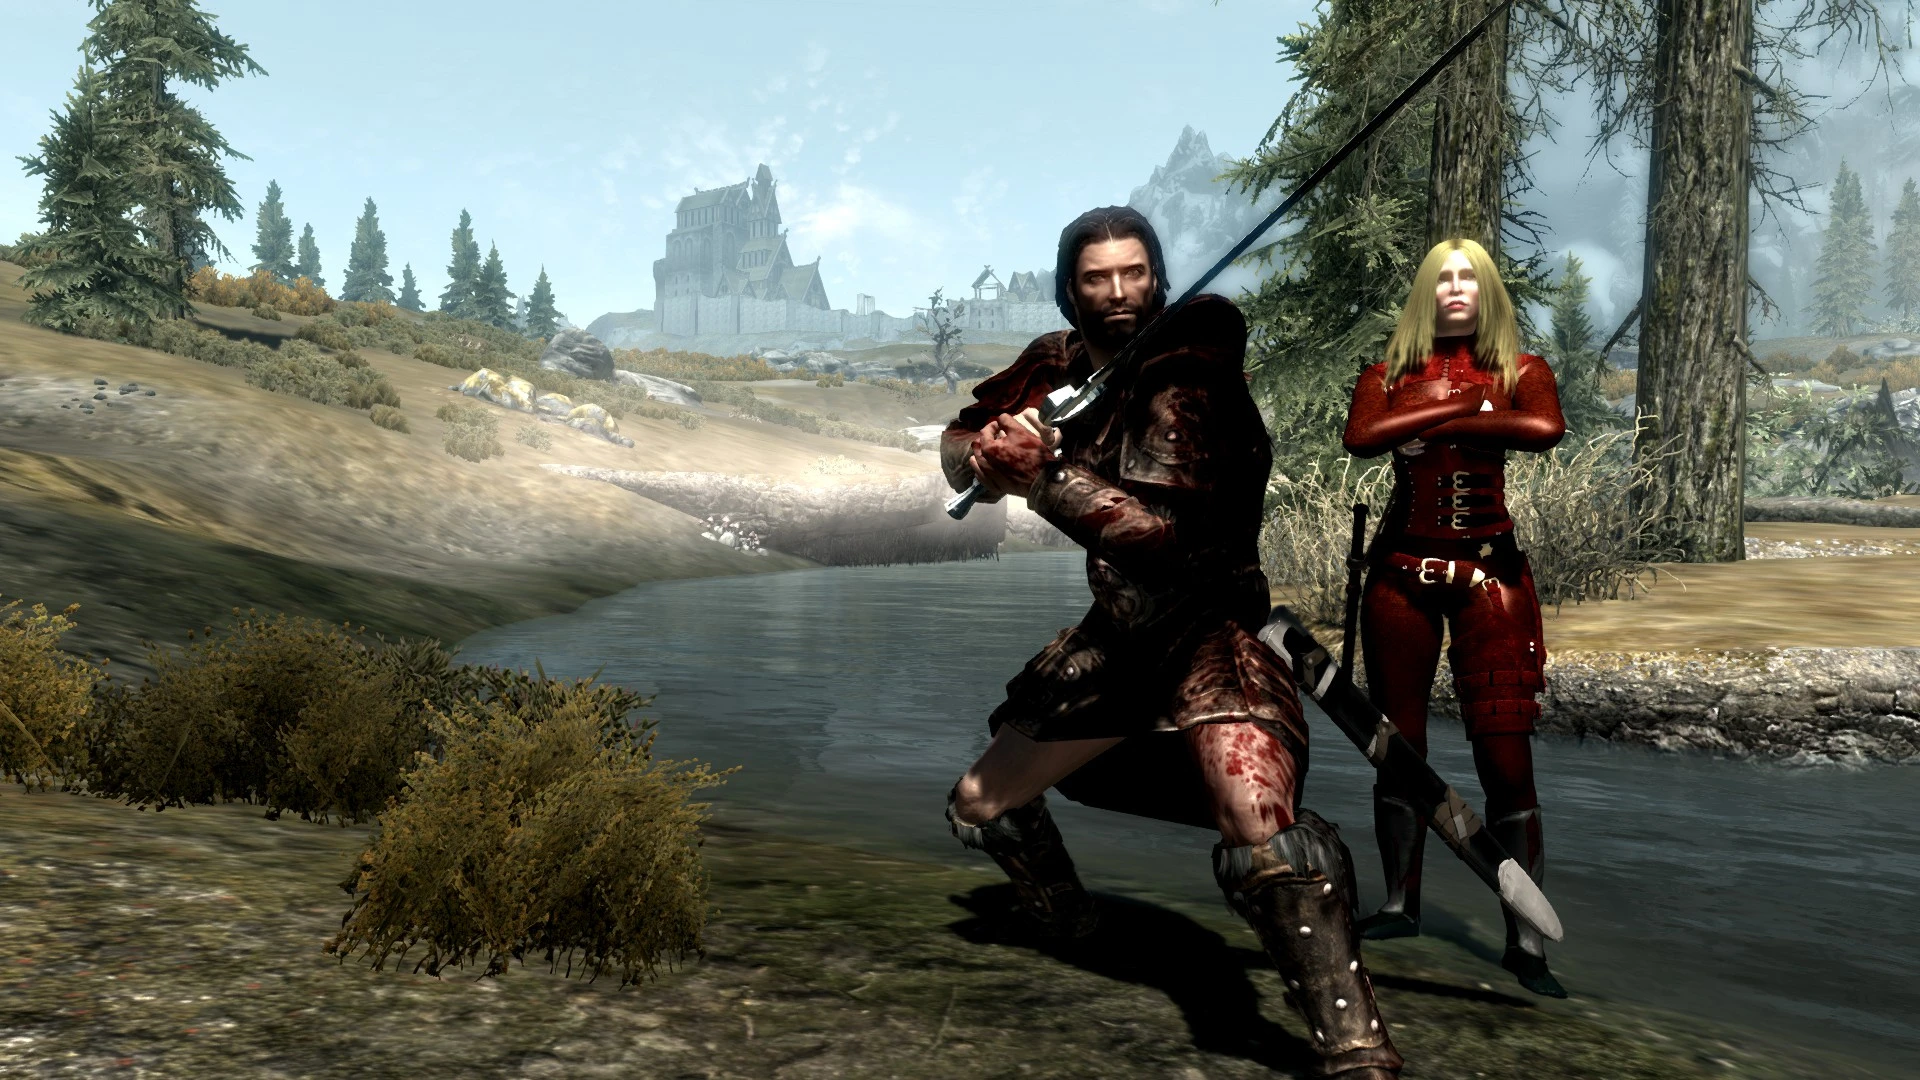 Legend Of The Seeker At Skyrim Nexus Mods And Community